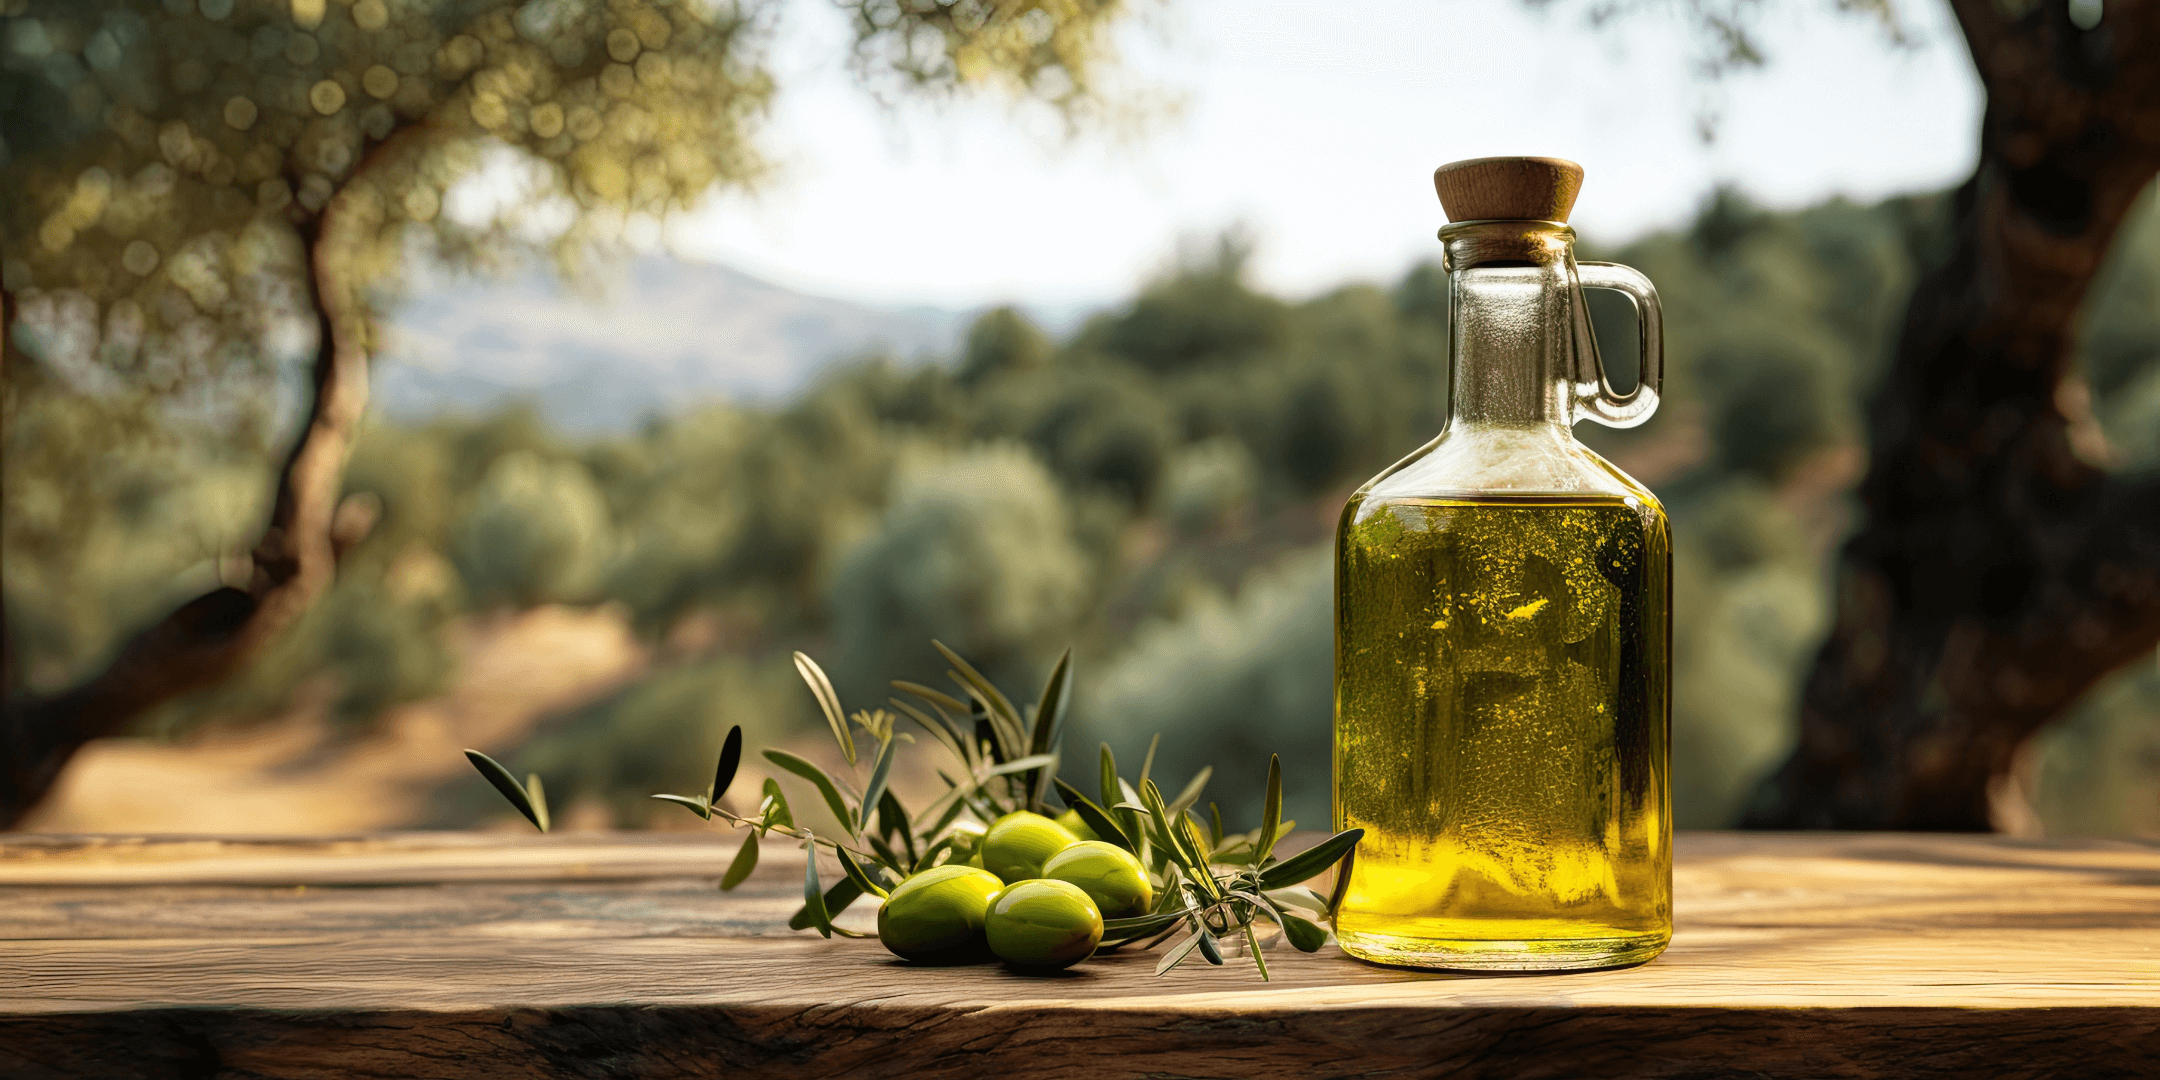 Olive oil industry in crisis as Europe's heatwave threatens another harvest, Food & drink industry